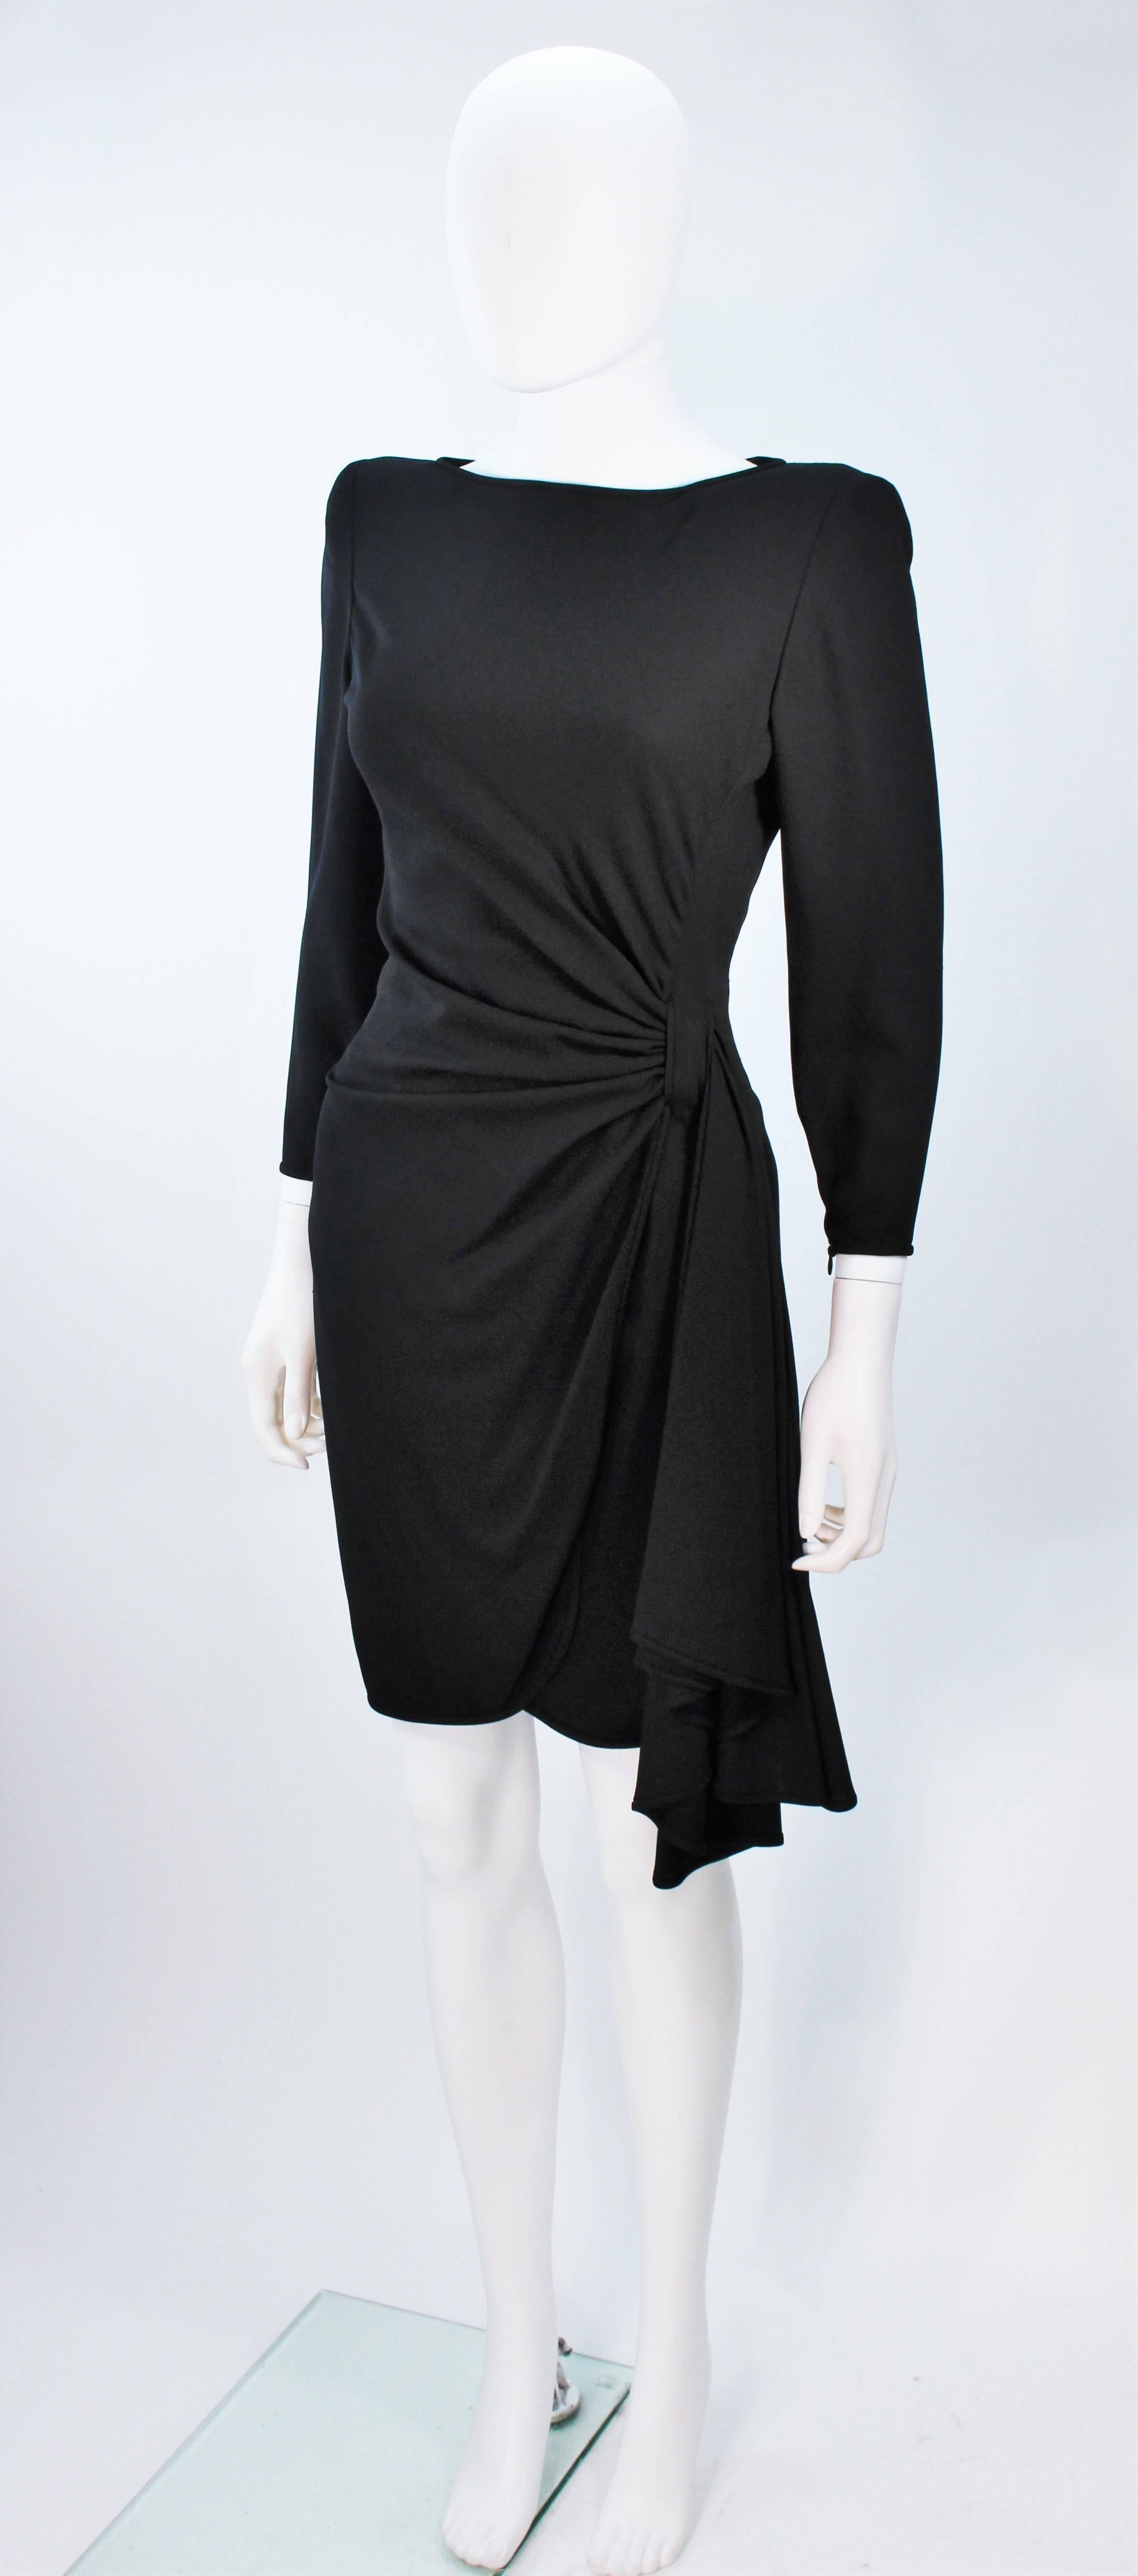 VALENTINO 1980'S Black Draped Cocktail Dress Size 6-8 In Excellent Condition For Sale In Los Angeles, CA